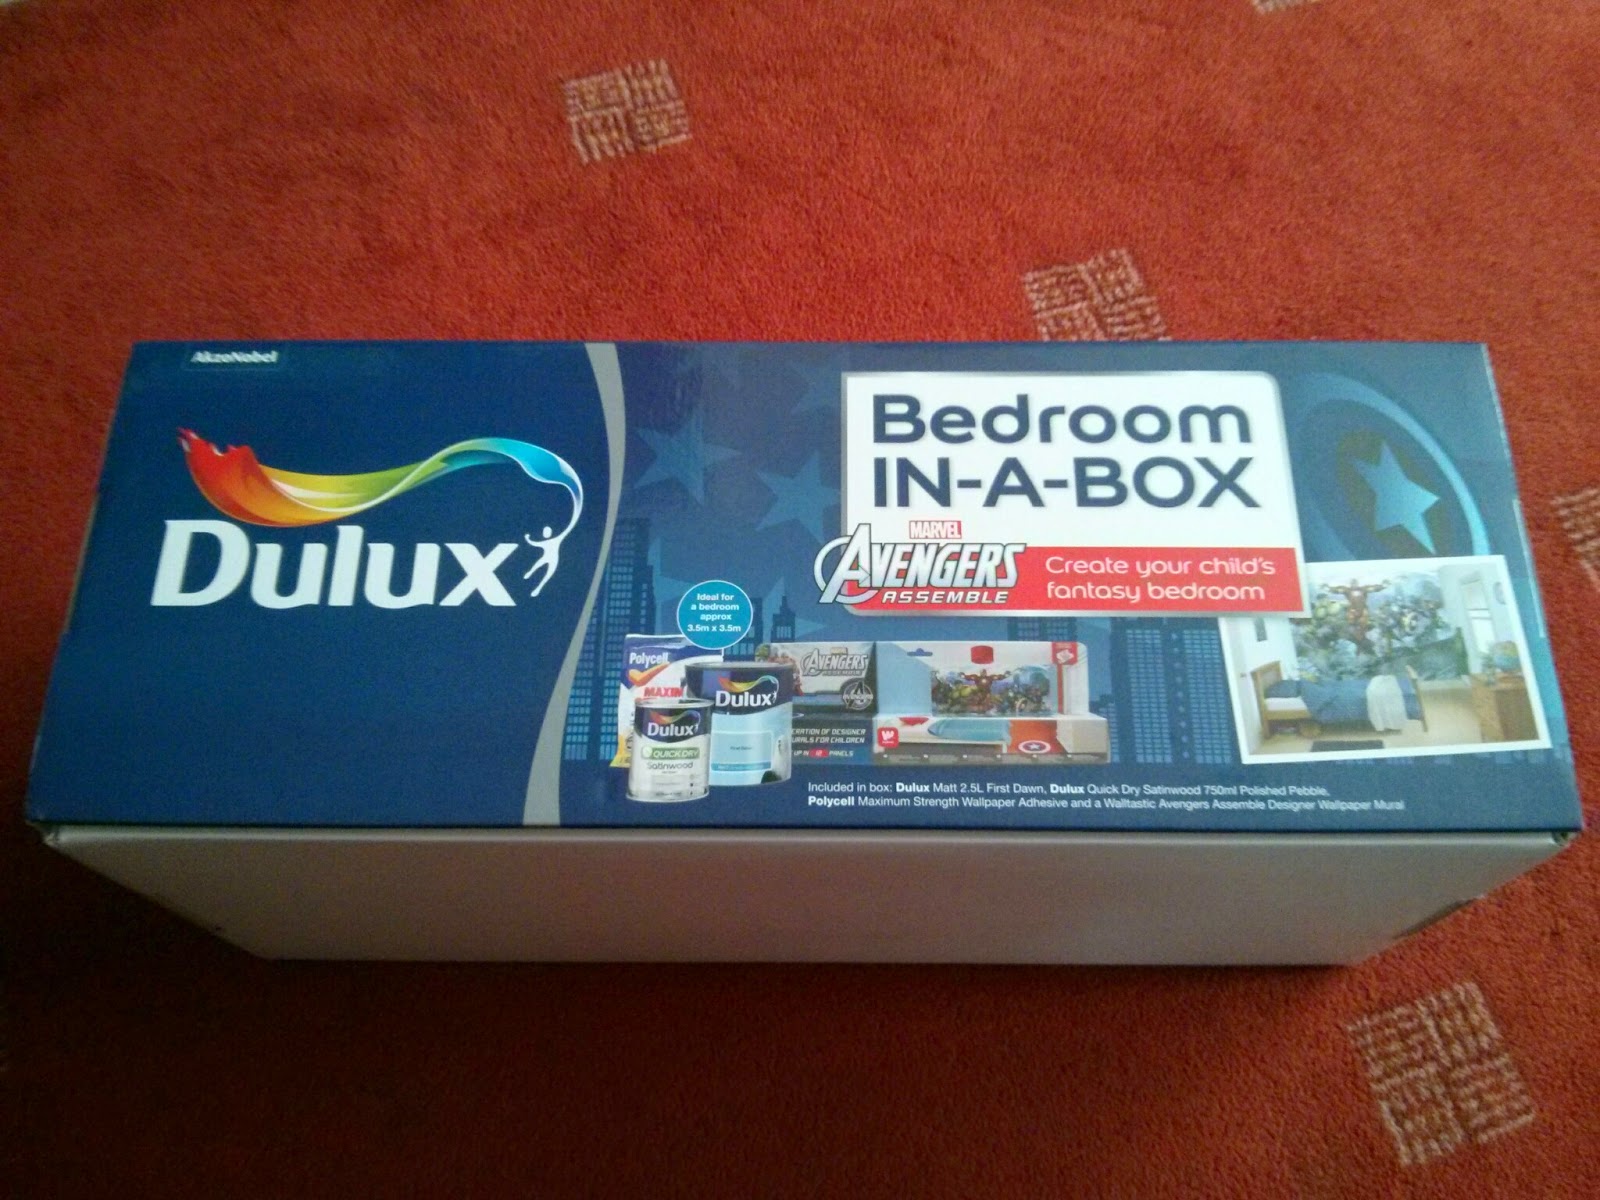 Dulux Bedroom in a box